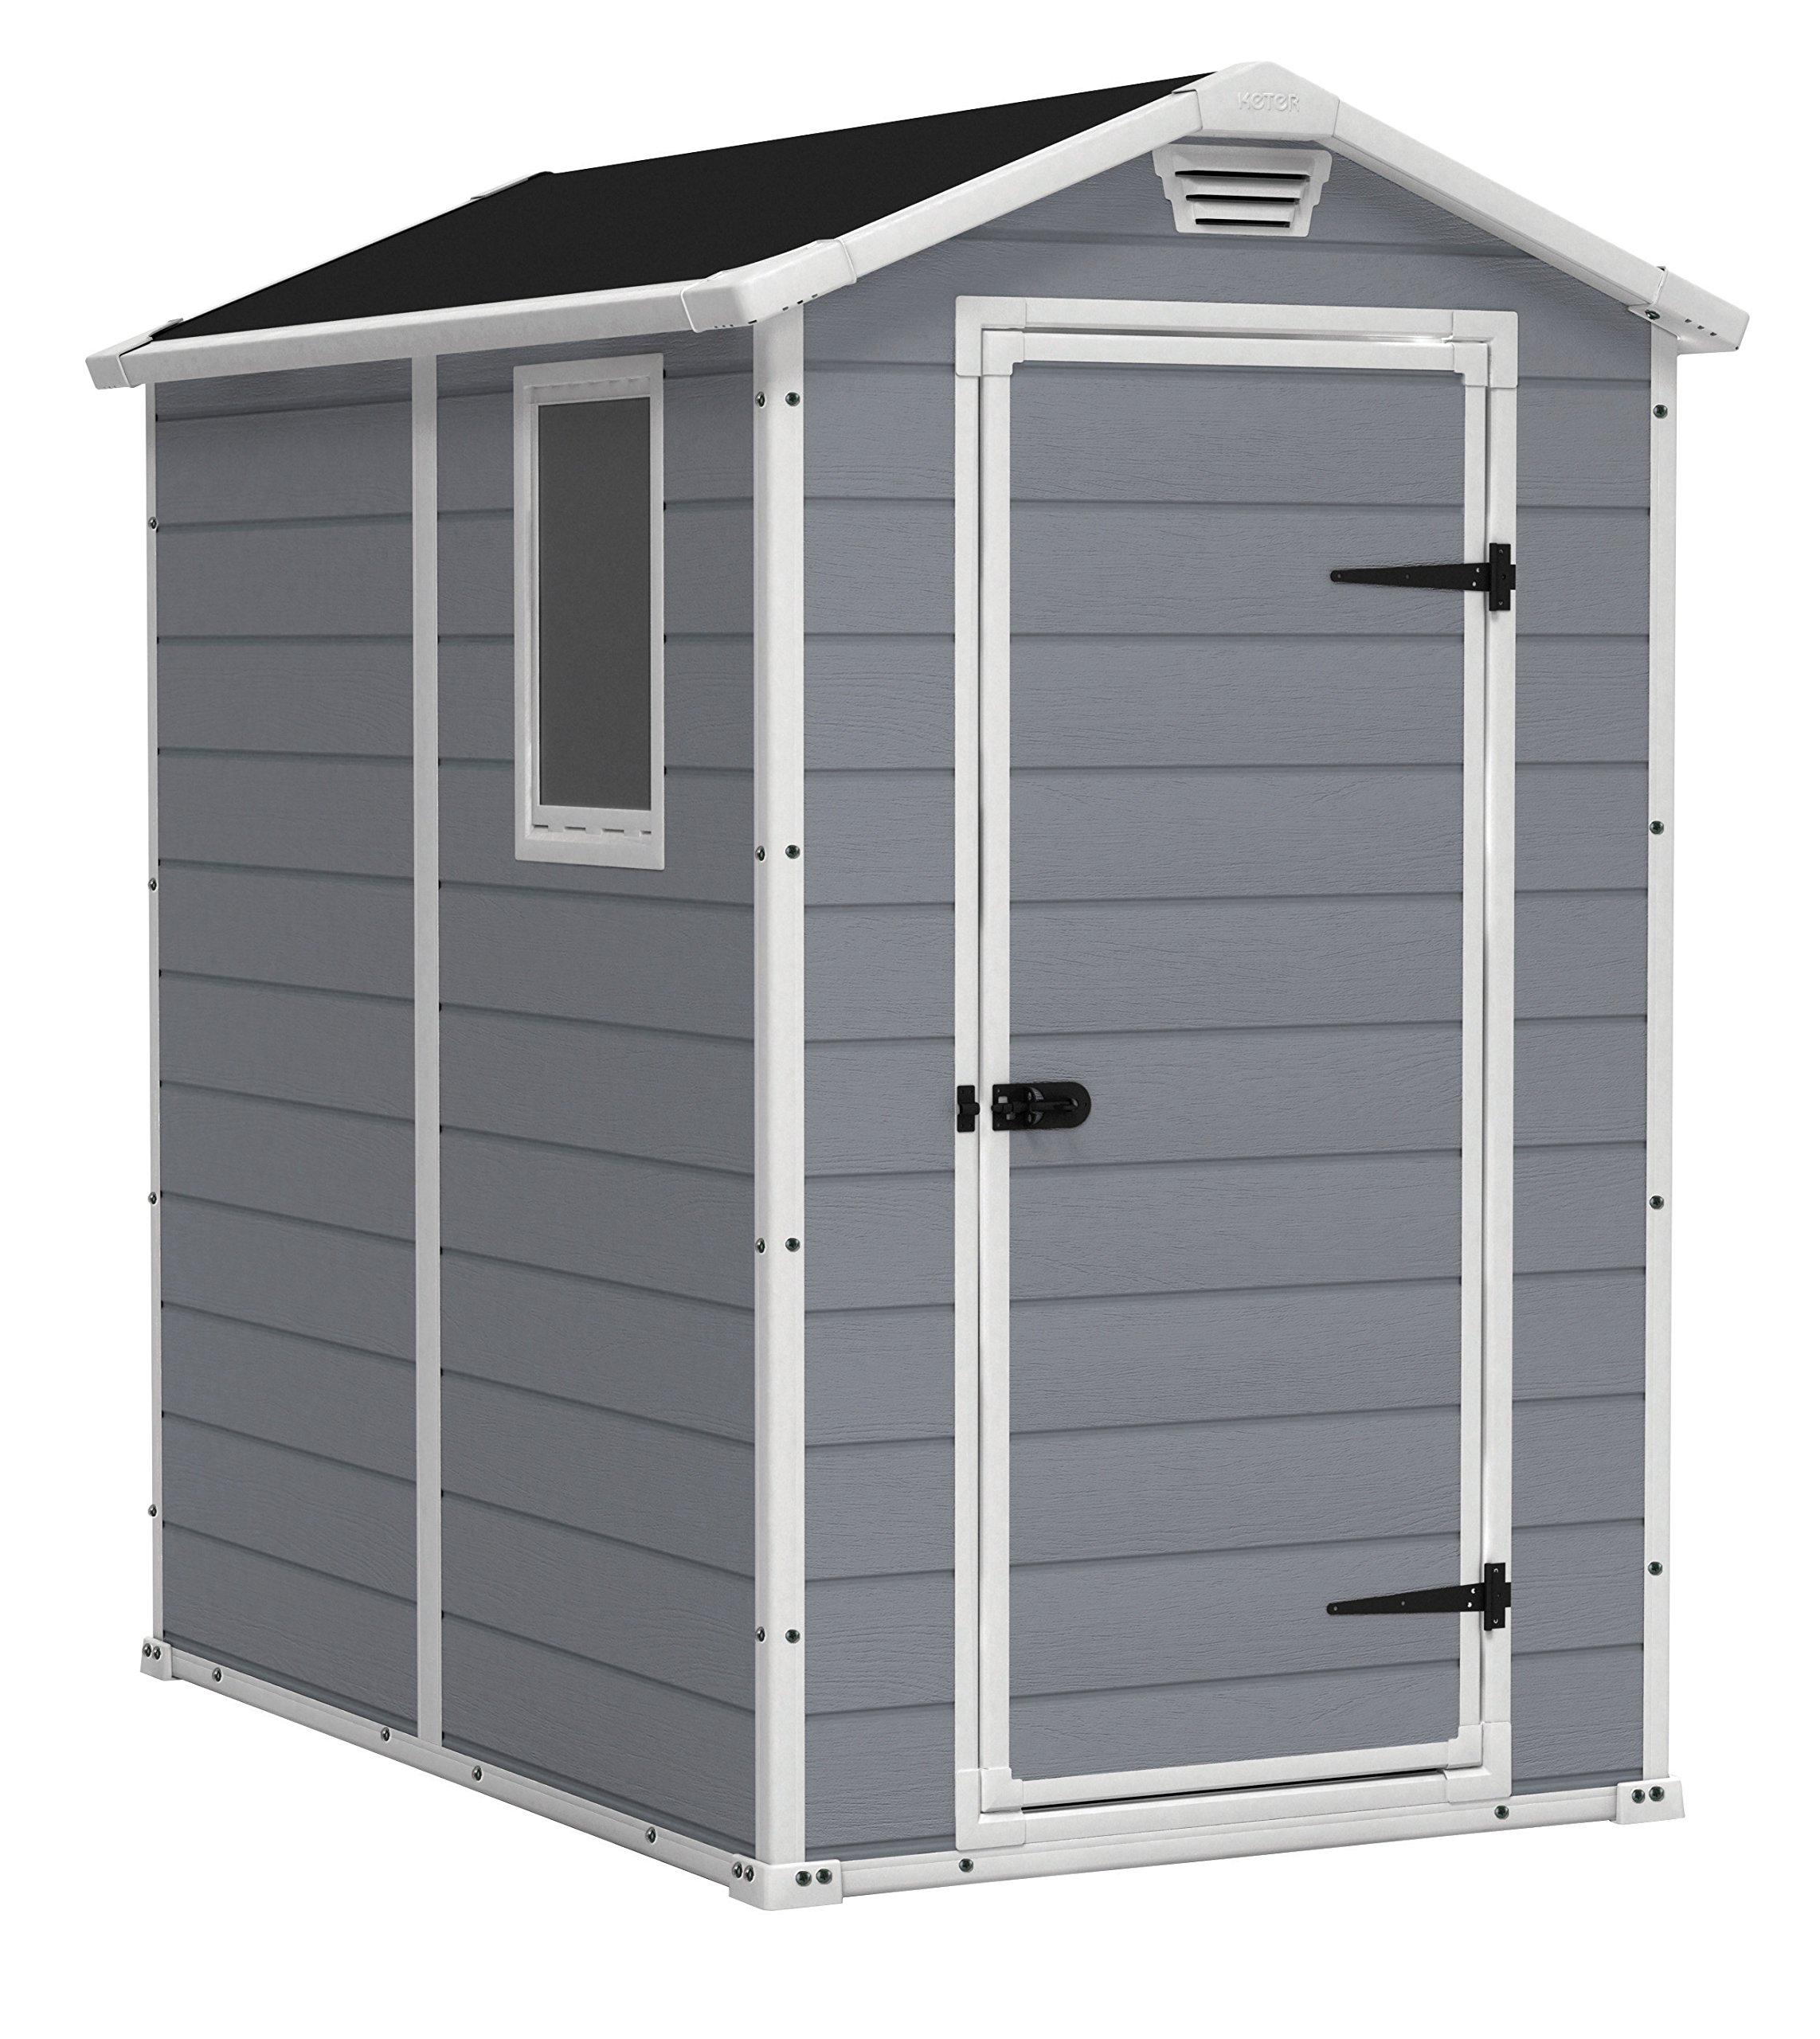 Keter Manor 4x6 Resin Outdoor Storage Shed Kit Perfect To Store Patio